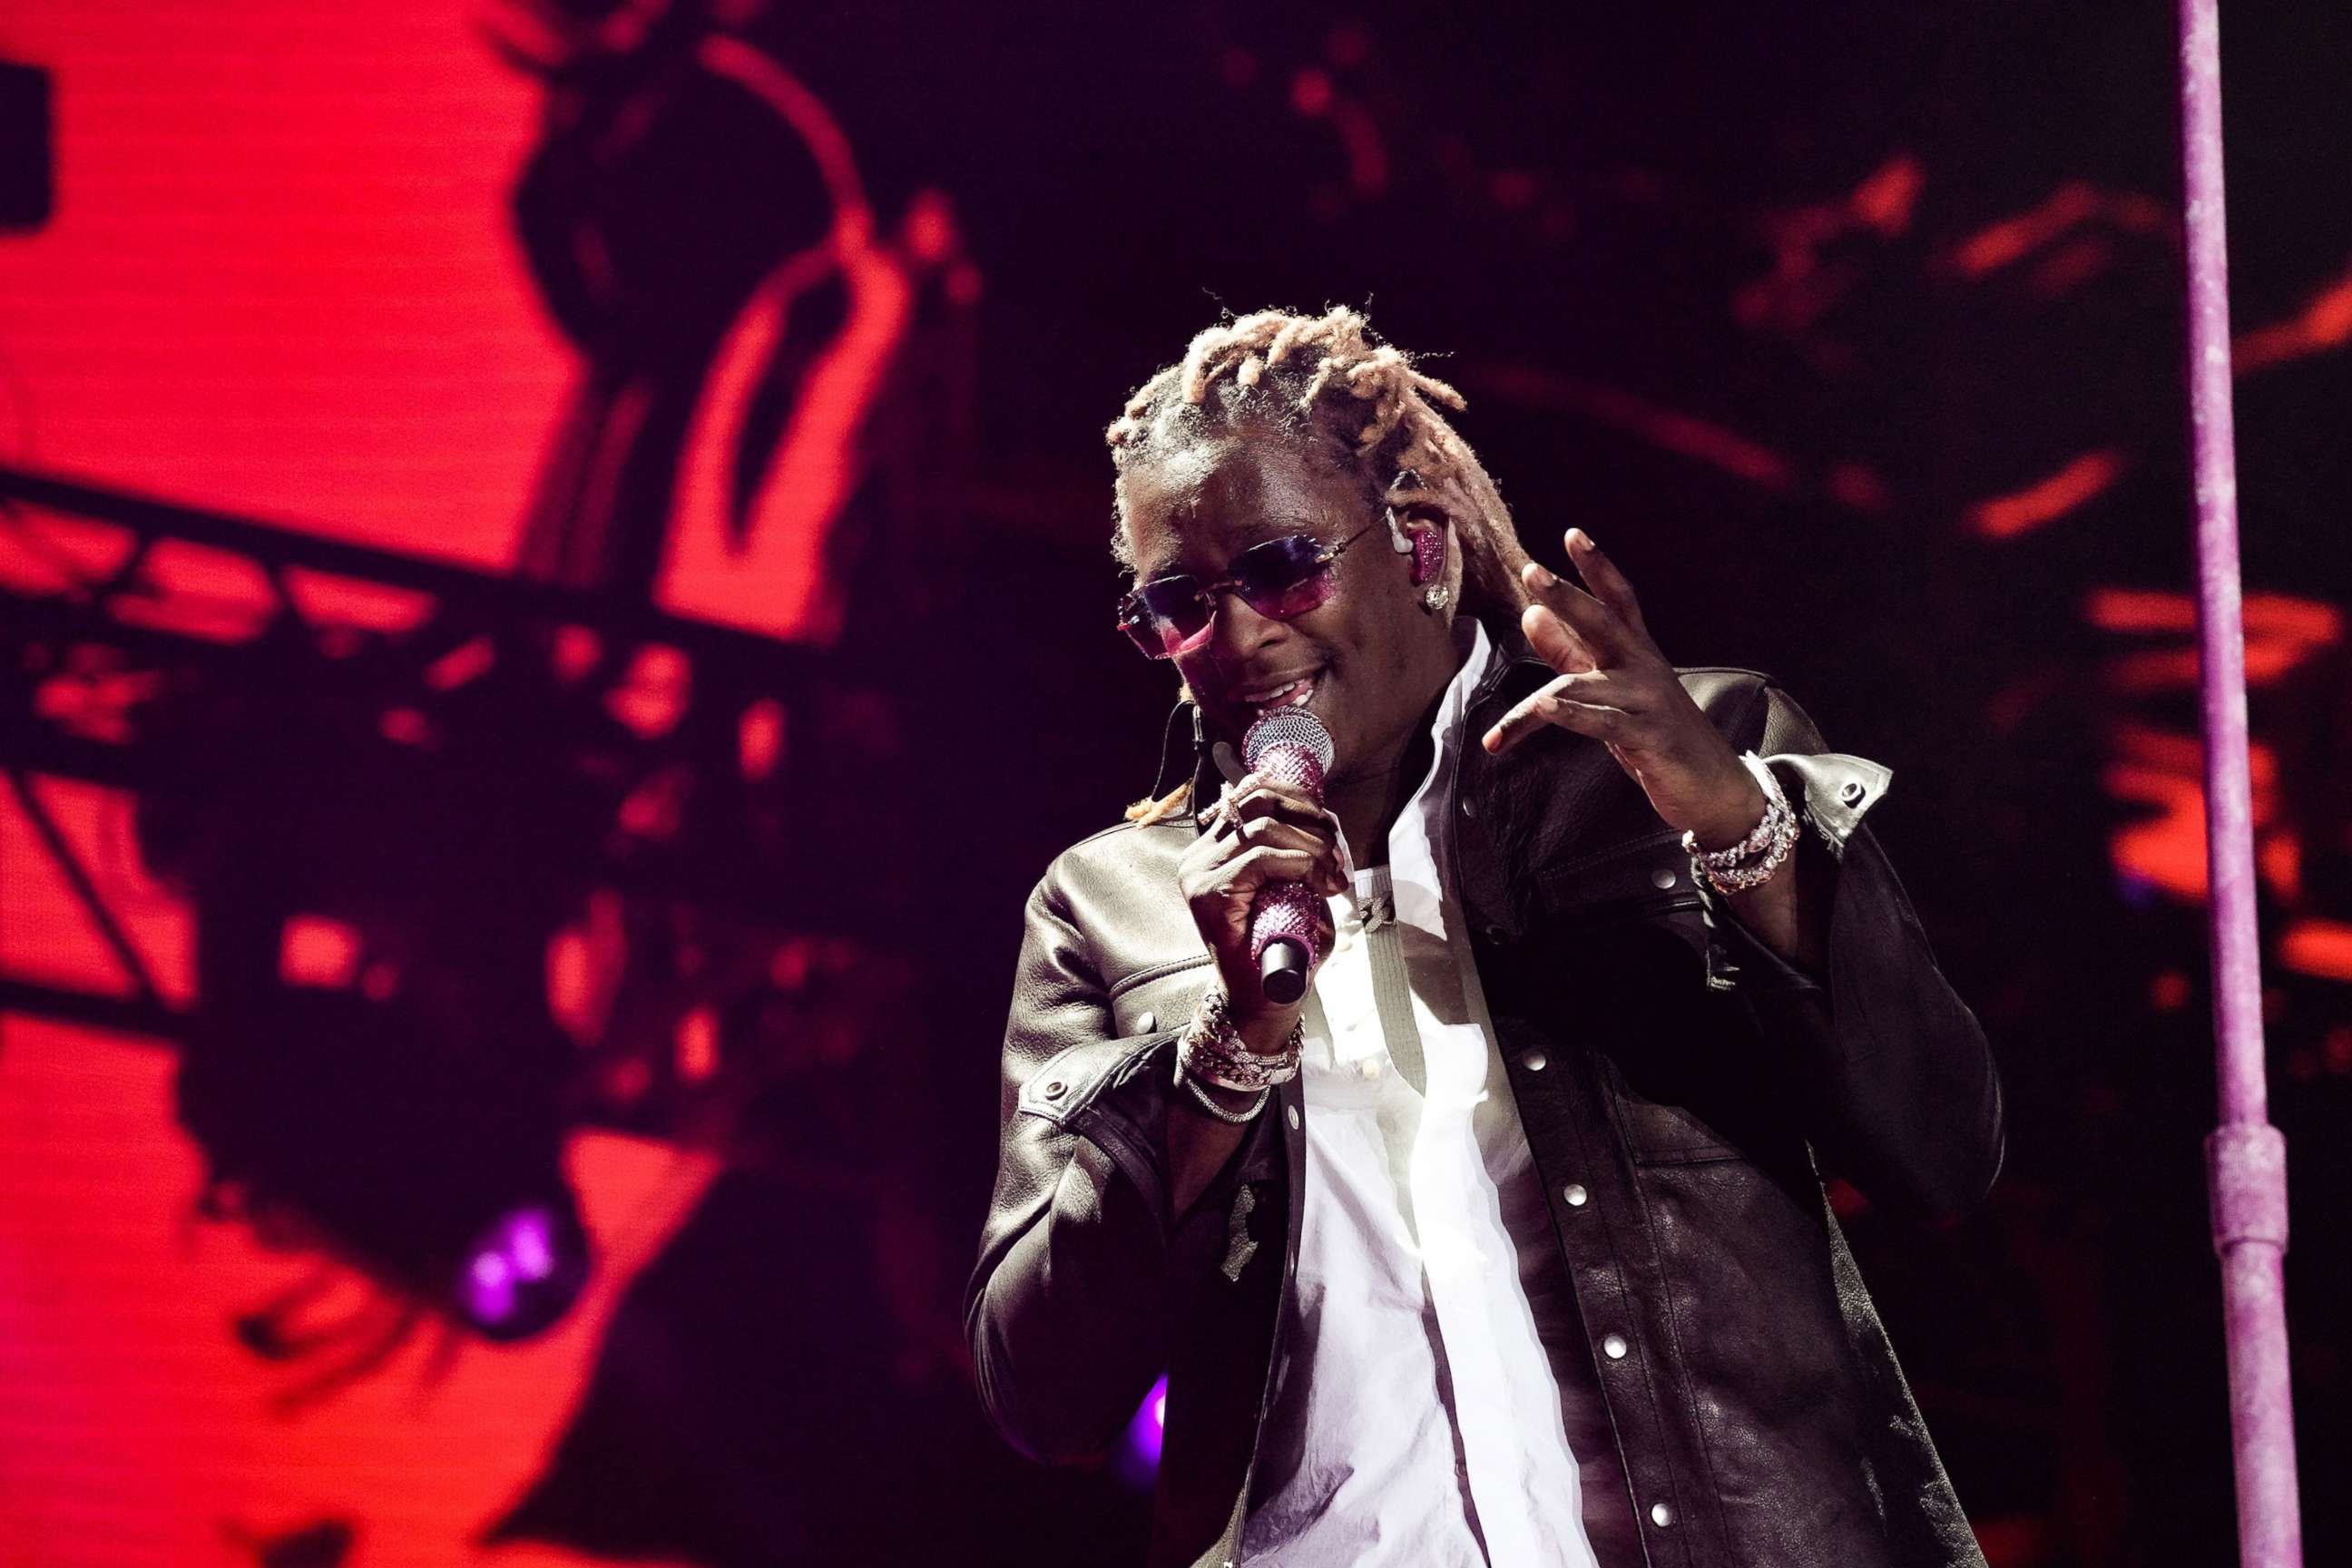 PHOTO: In this Sept. 19, 2021, Young Thug performs onstage during the 2021 Life Is Beautiful Music & Art Festival in Las Vegas.